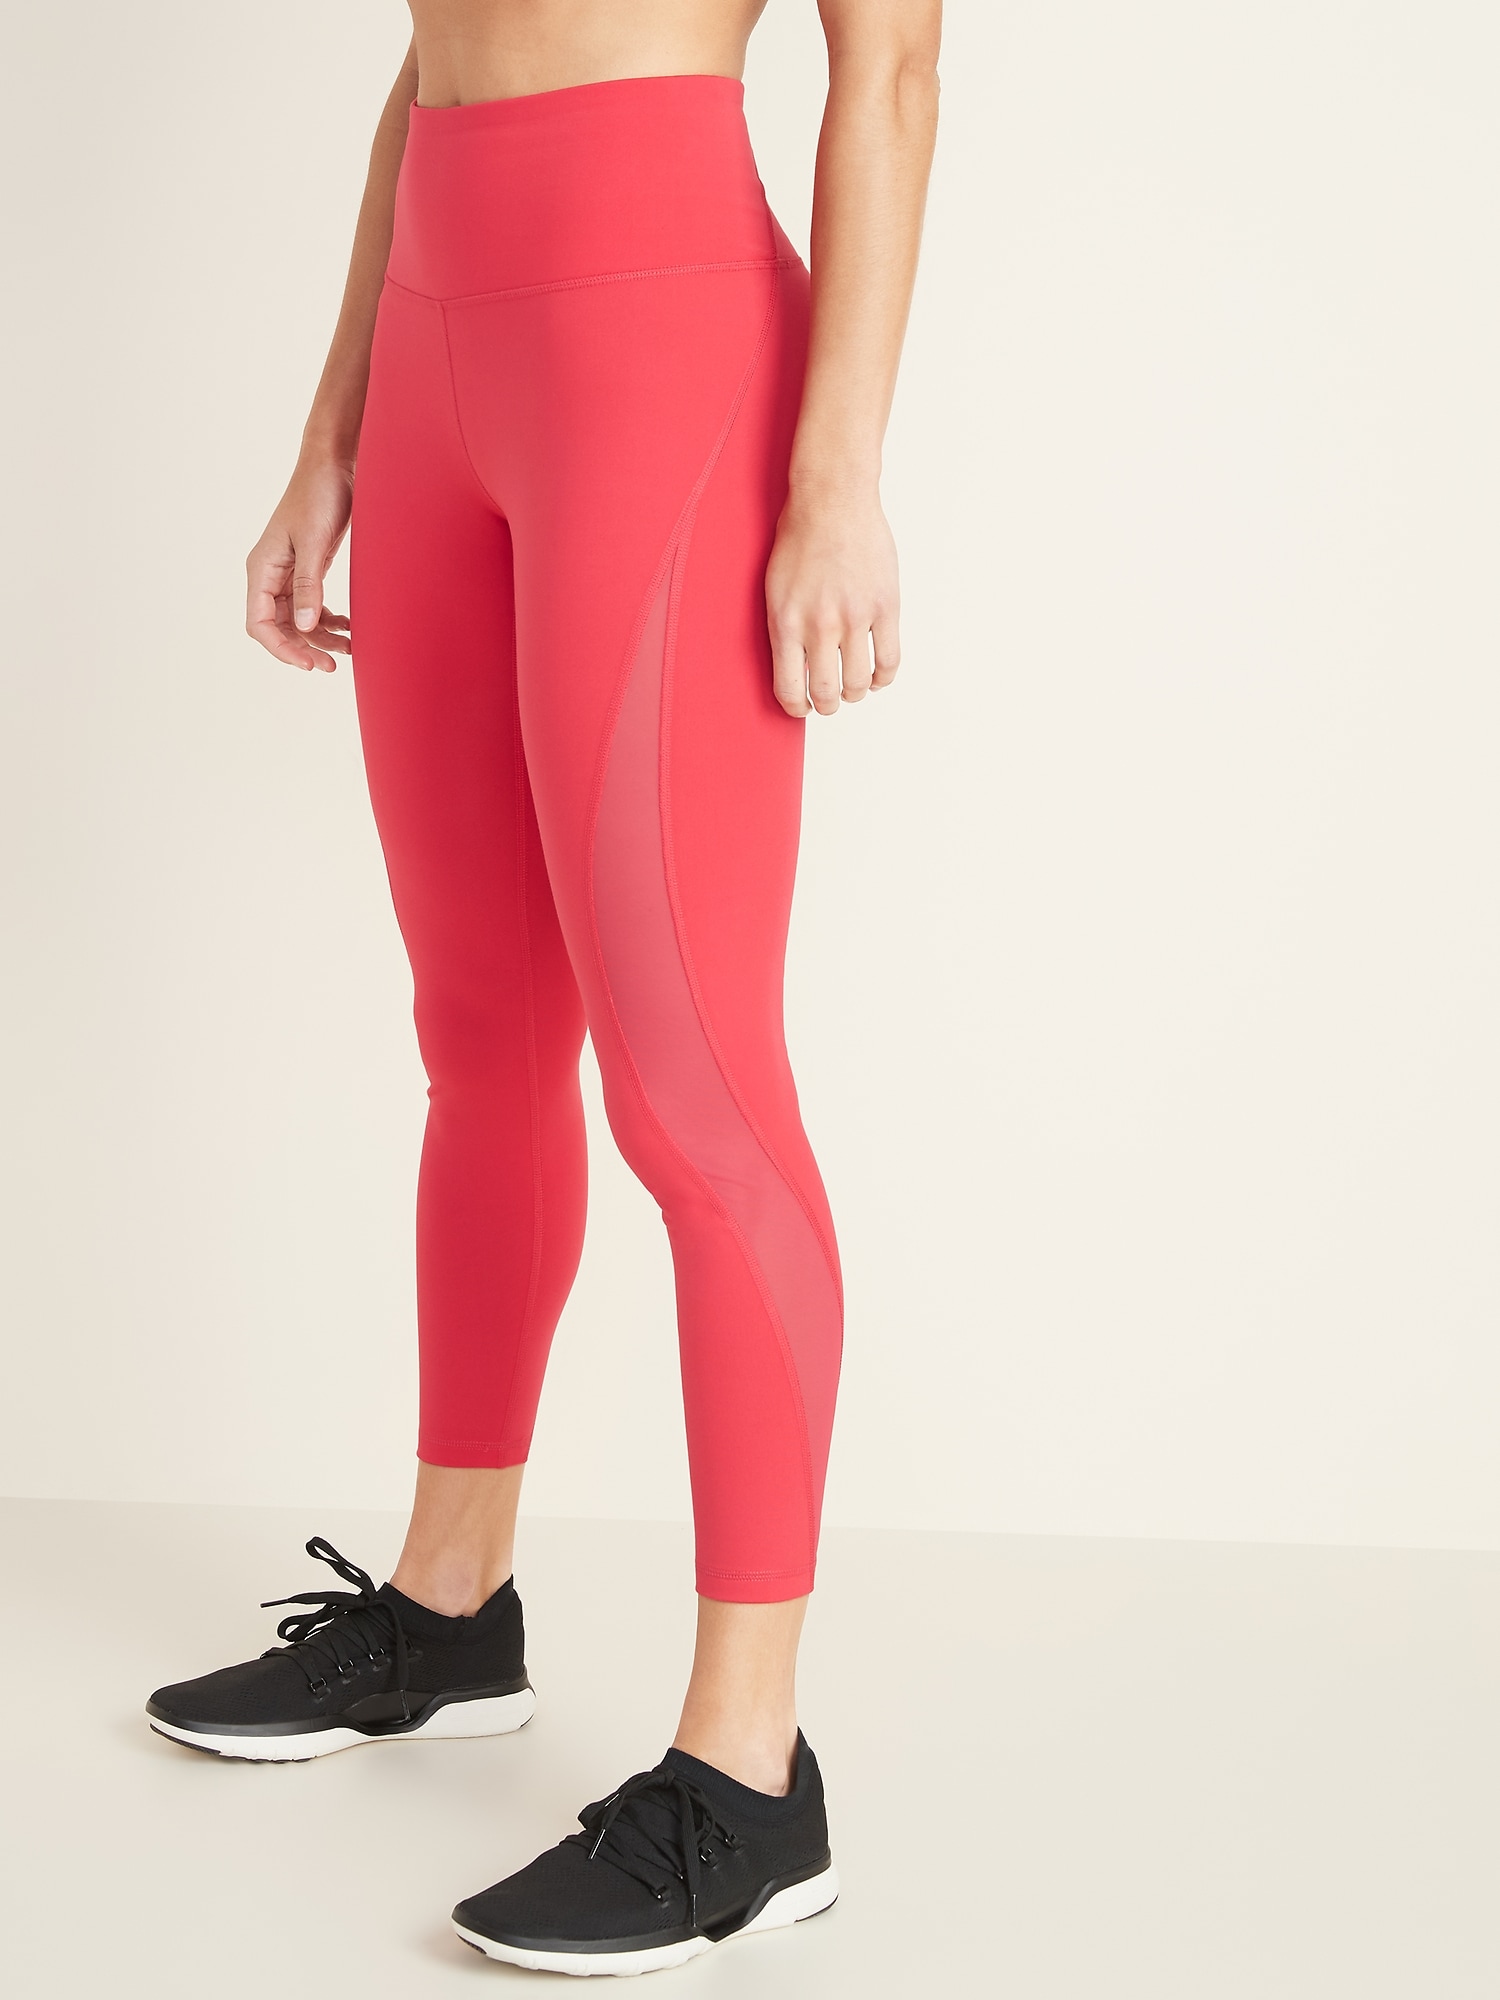 Women's High Waisted Cotton Compression Leggings. - Long, s (739142)